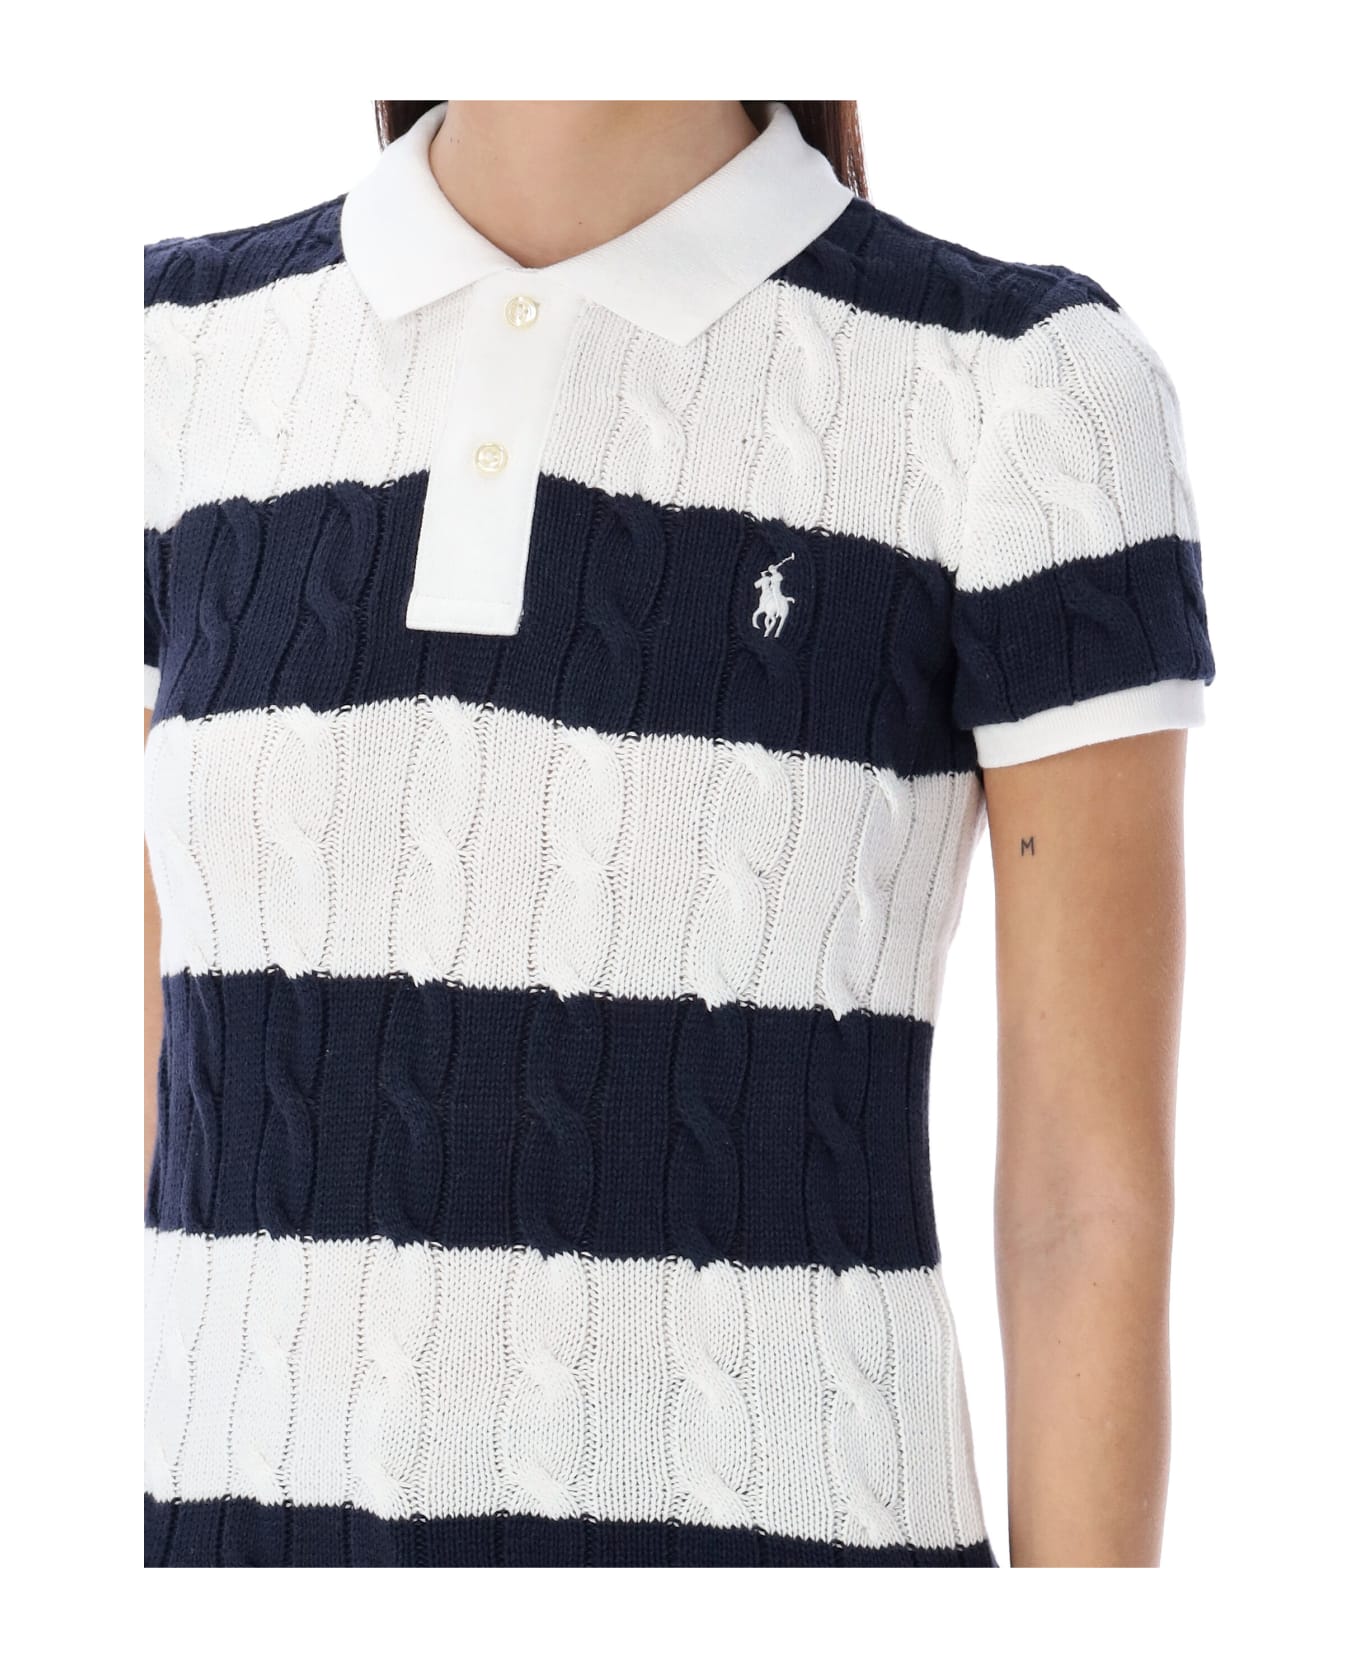 Polo Ralph Lauren Cotton Cable Knit Striped Polo Shirt - BLUE WHITE ポロシャツ